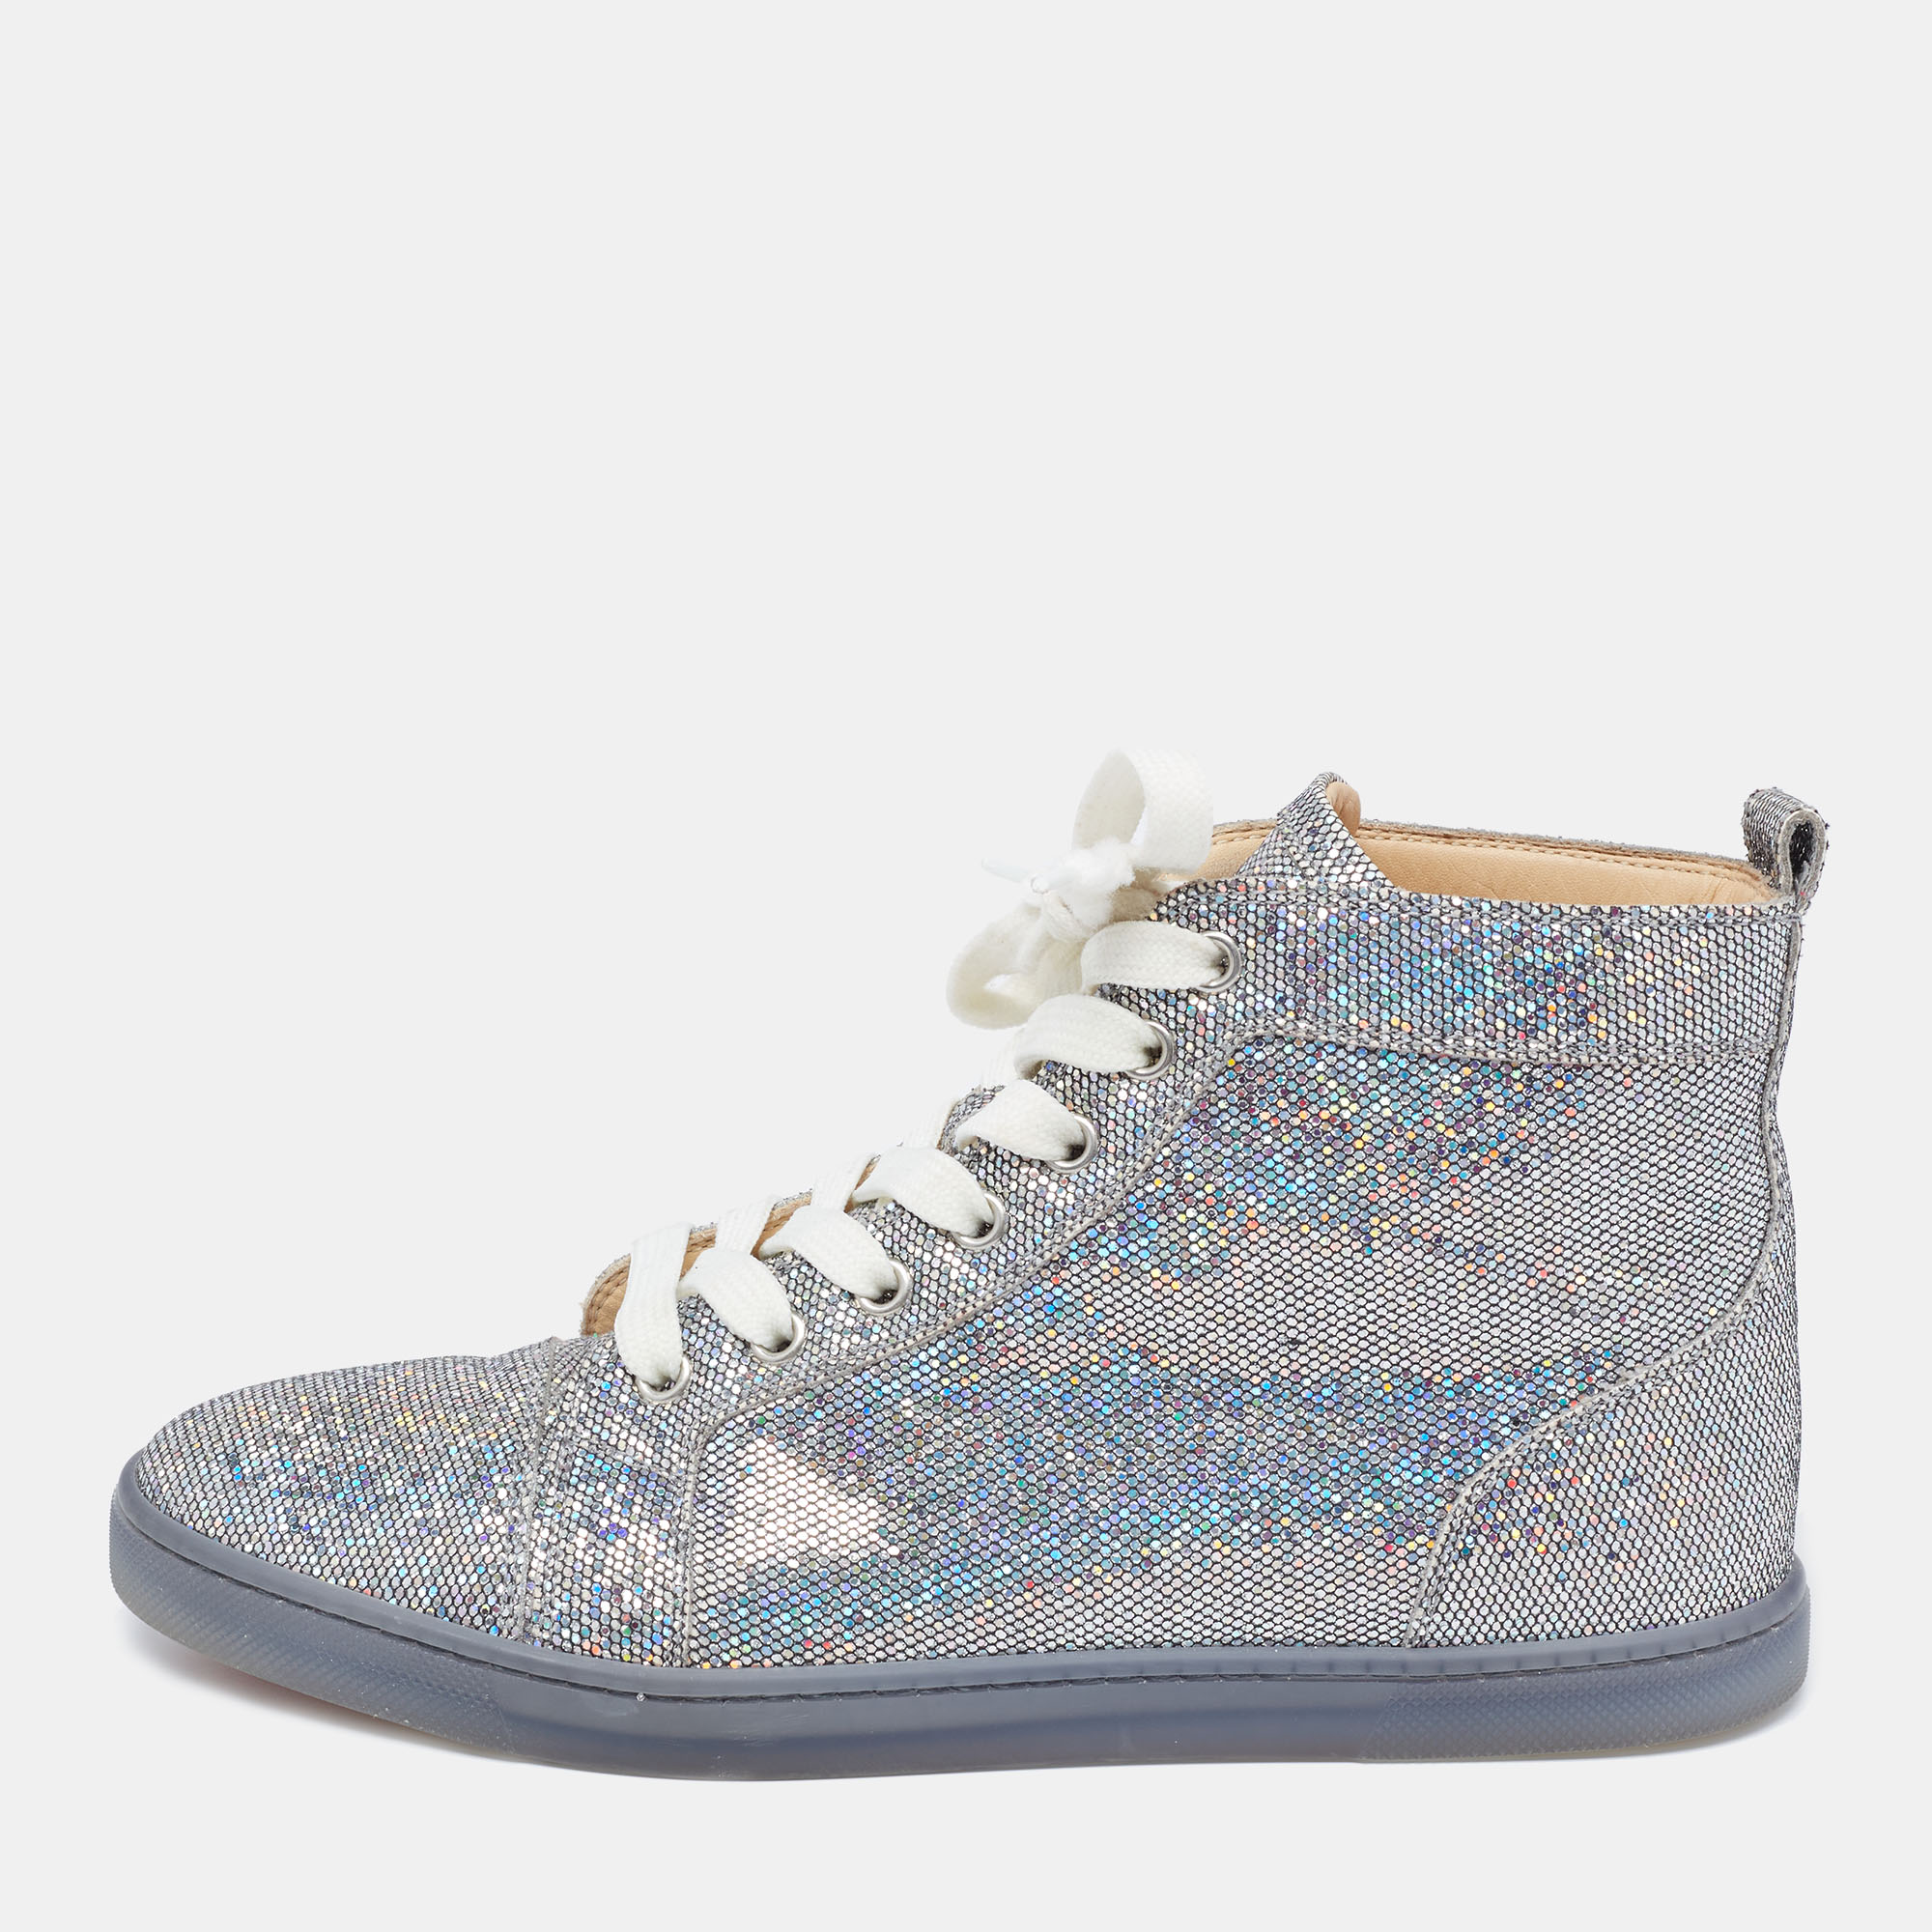 Pre-owned Christian Louboutin Silver Glitter Disco Ball Rantus Orlato High Top Trainers Size 38.5